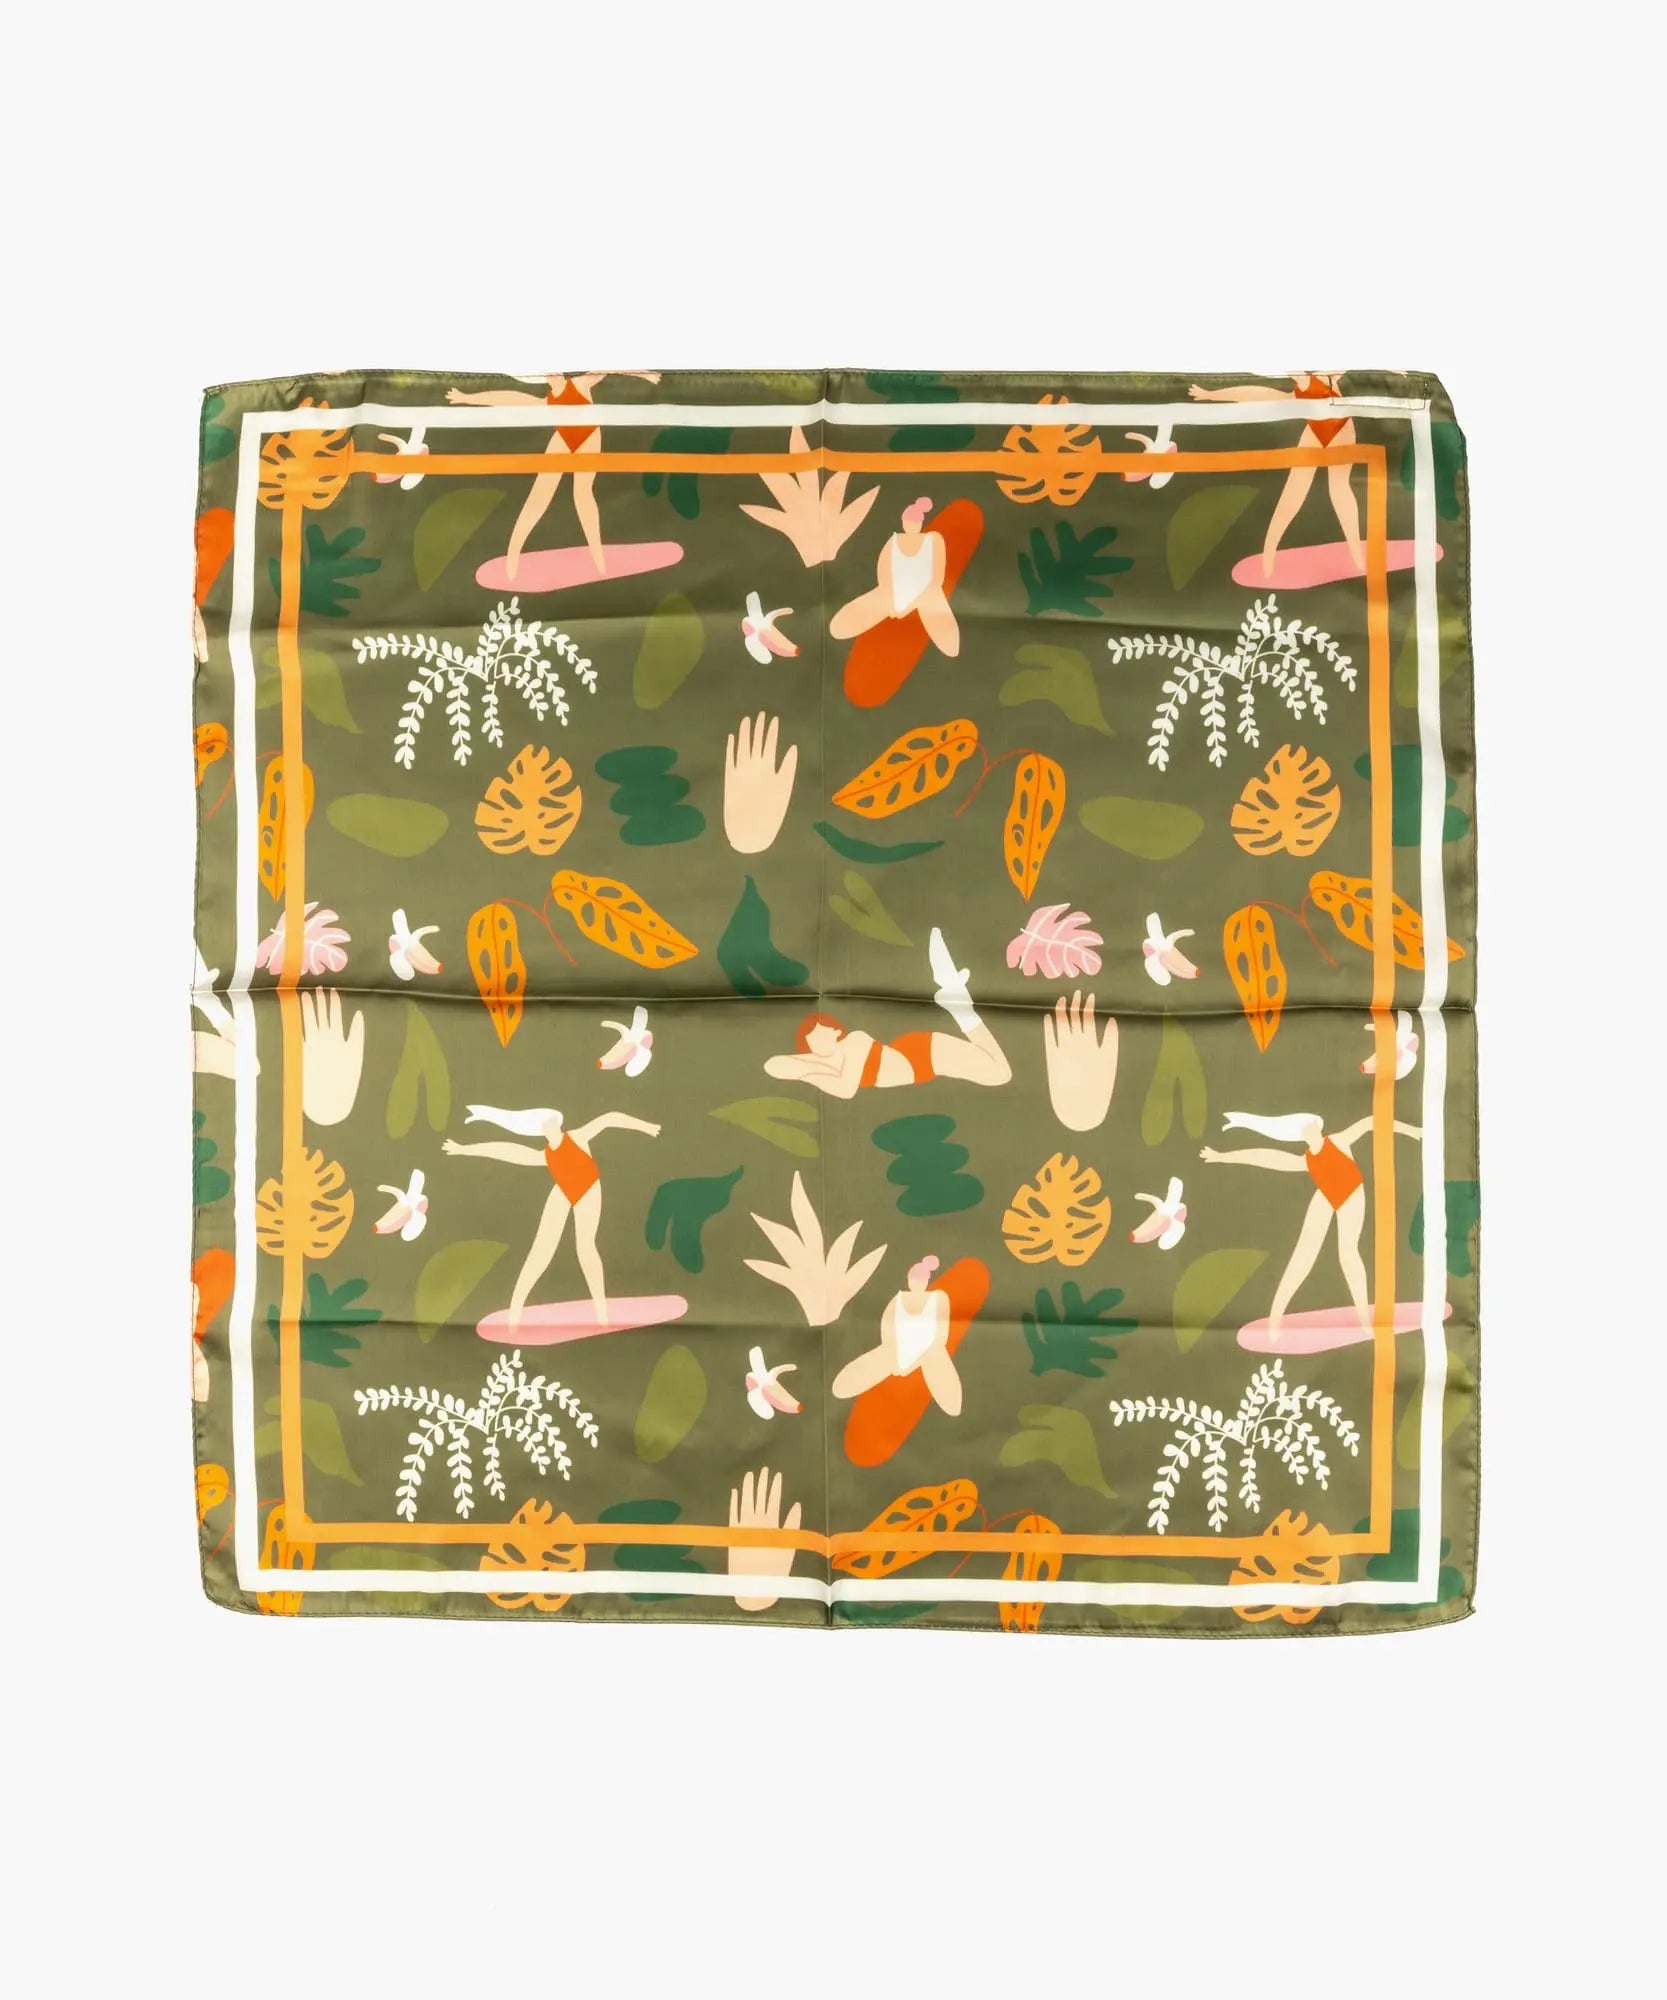 Pañuelo Bandana The Artist Project by @daf_and_craft